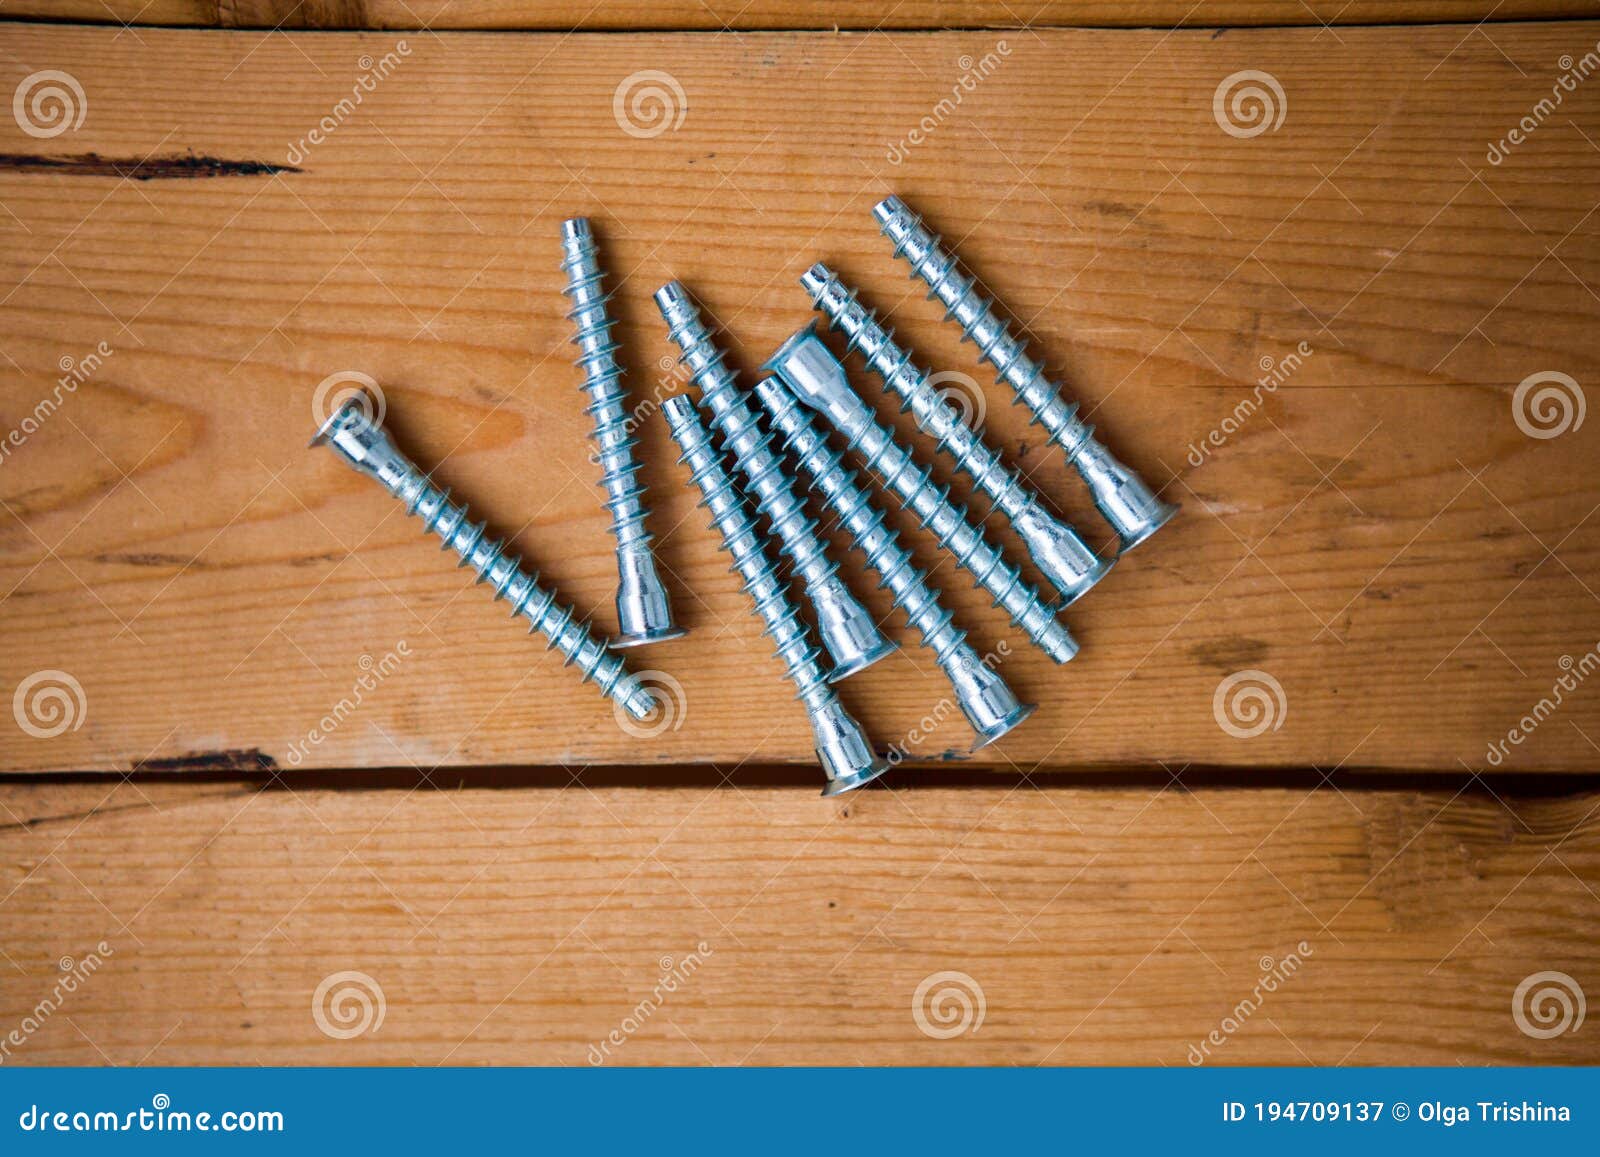 set of metalware on the wooden background